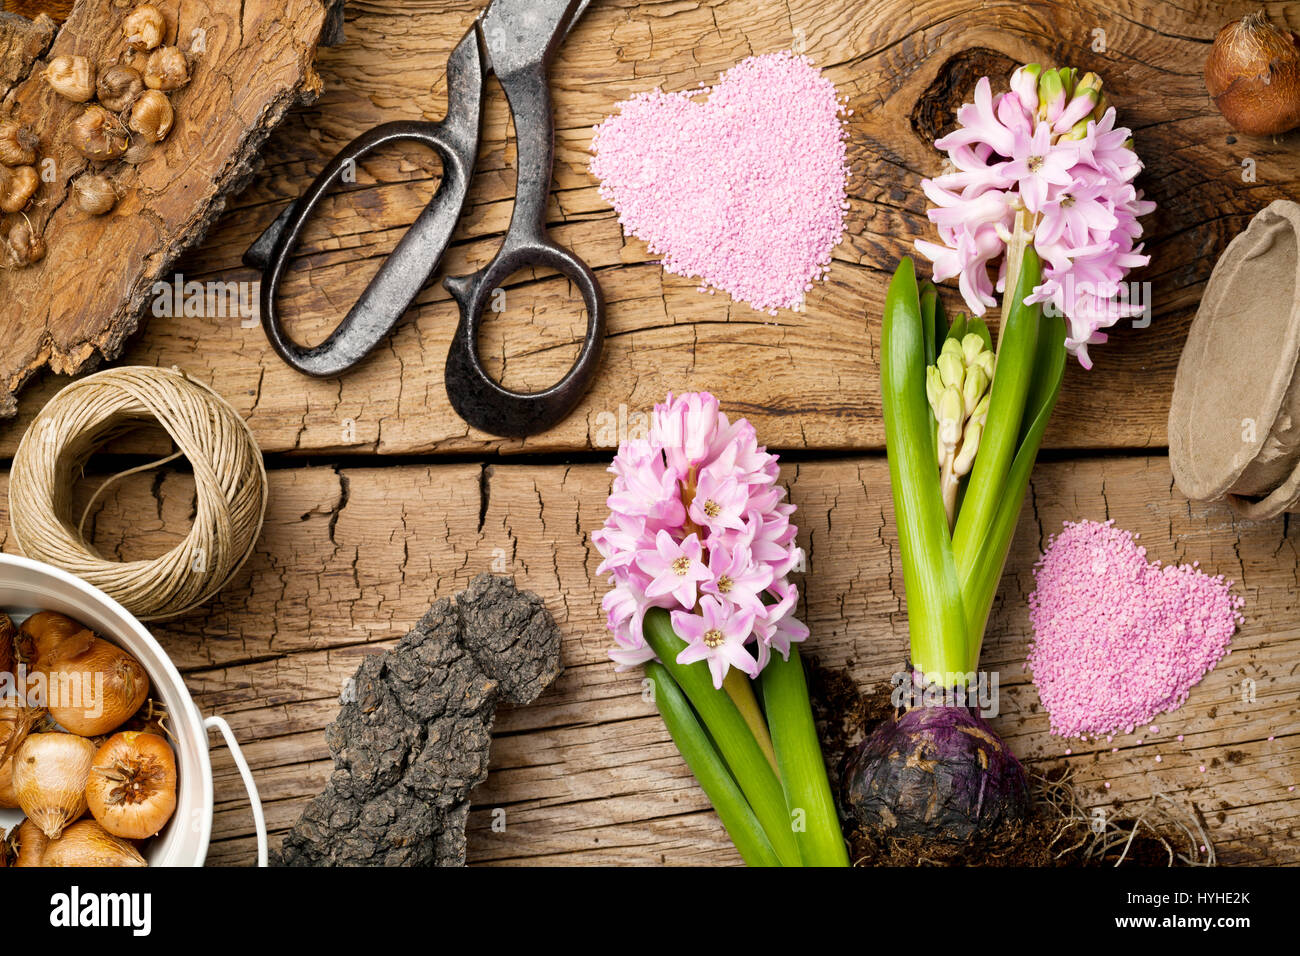 Gardening background with hyacinth flower and bulbs on wooden table. Top view Stock Photo